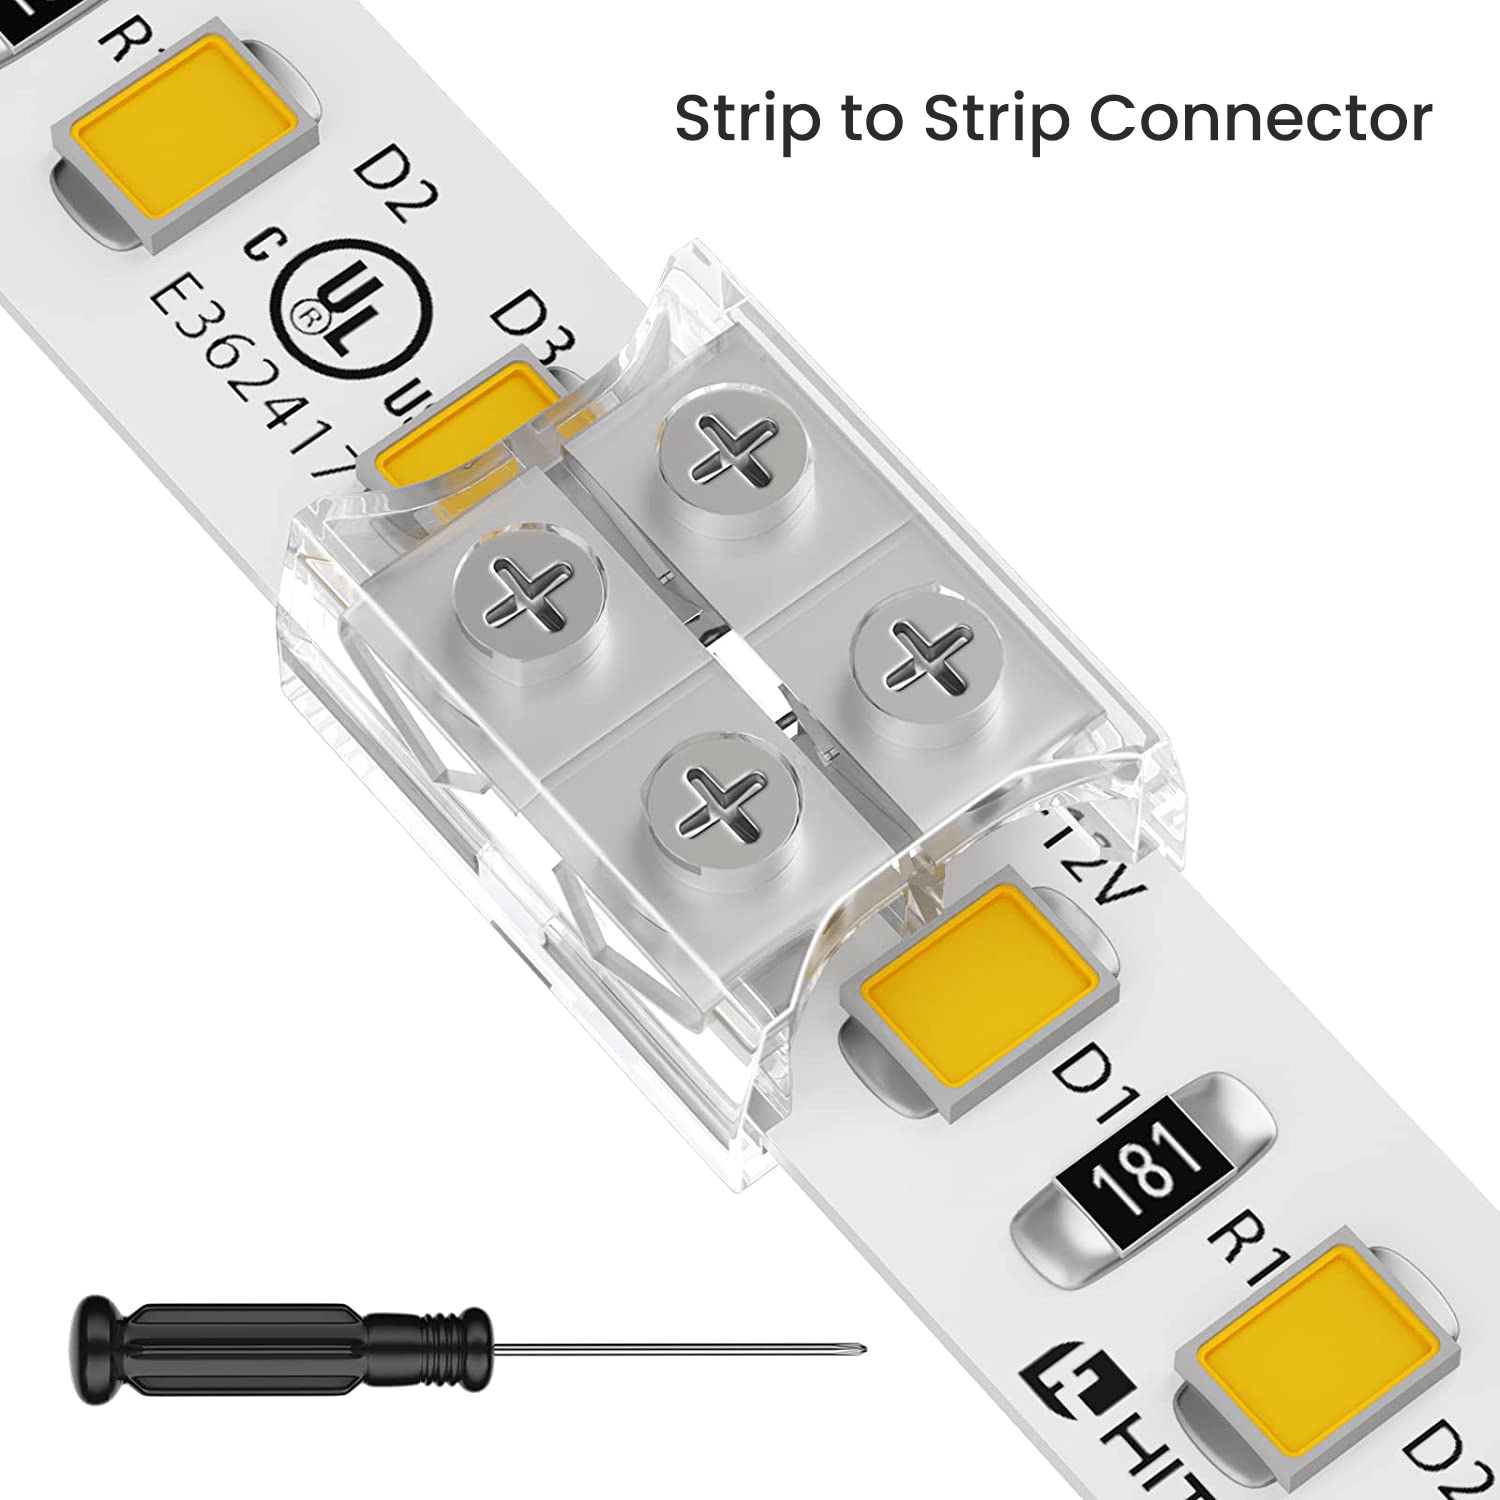 http://hitlights.com/cdn/shop/files/10mm-2-pin-solderless-transparent-terminal-block-led-light-strip-connectors-single-color-12-pack-con-10s-tb-ss-12pk-12pcs-of-strip-to-strip-10mm-with-screw-driver-hitlights-4034505306.png?v=1698876013